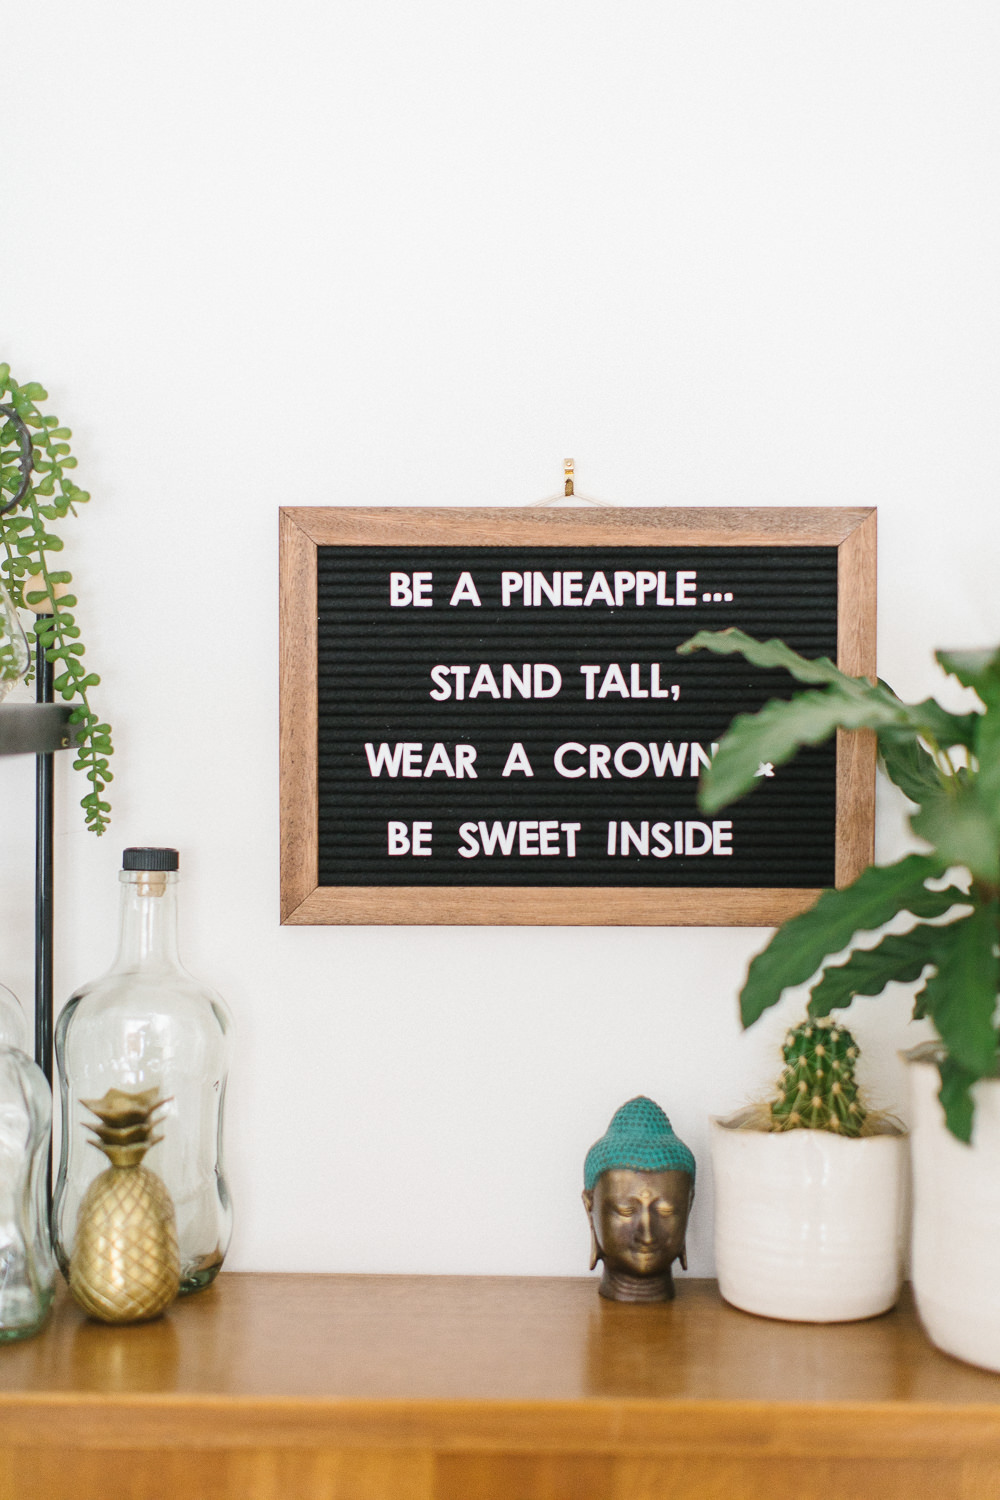 'Be a pineapple' letter board